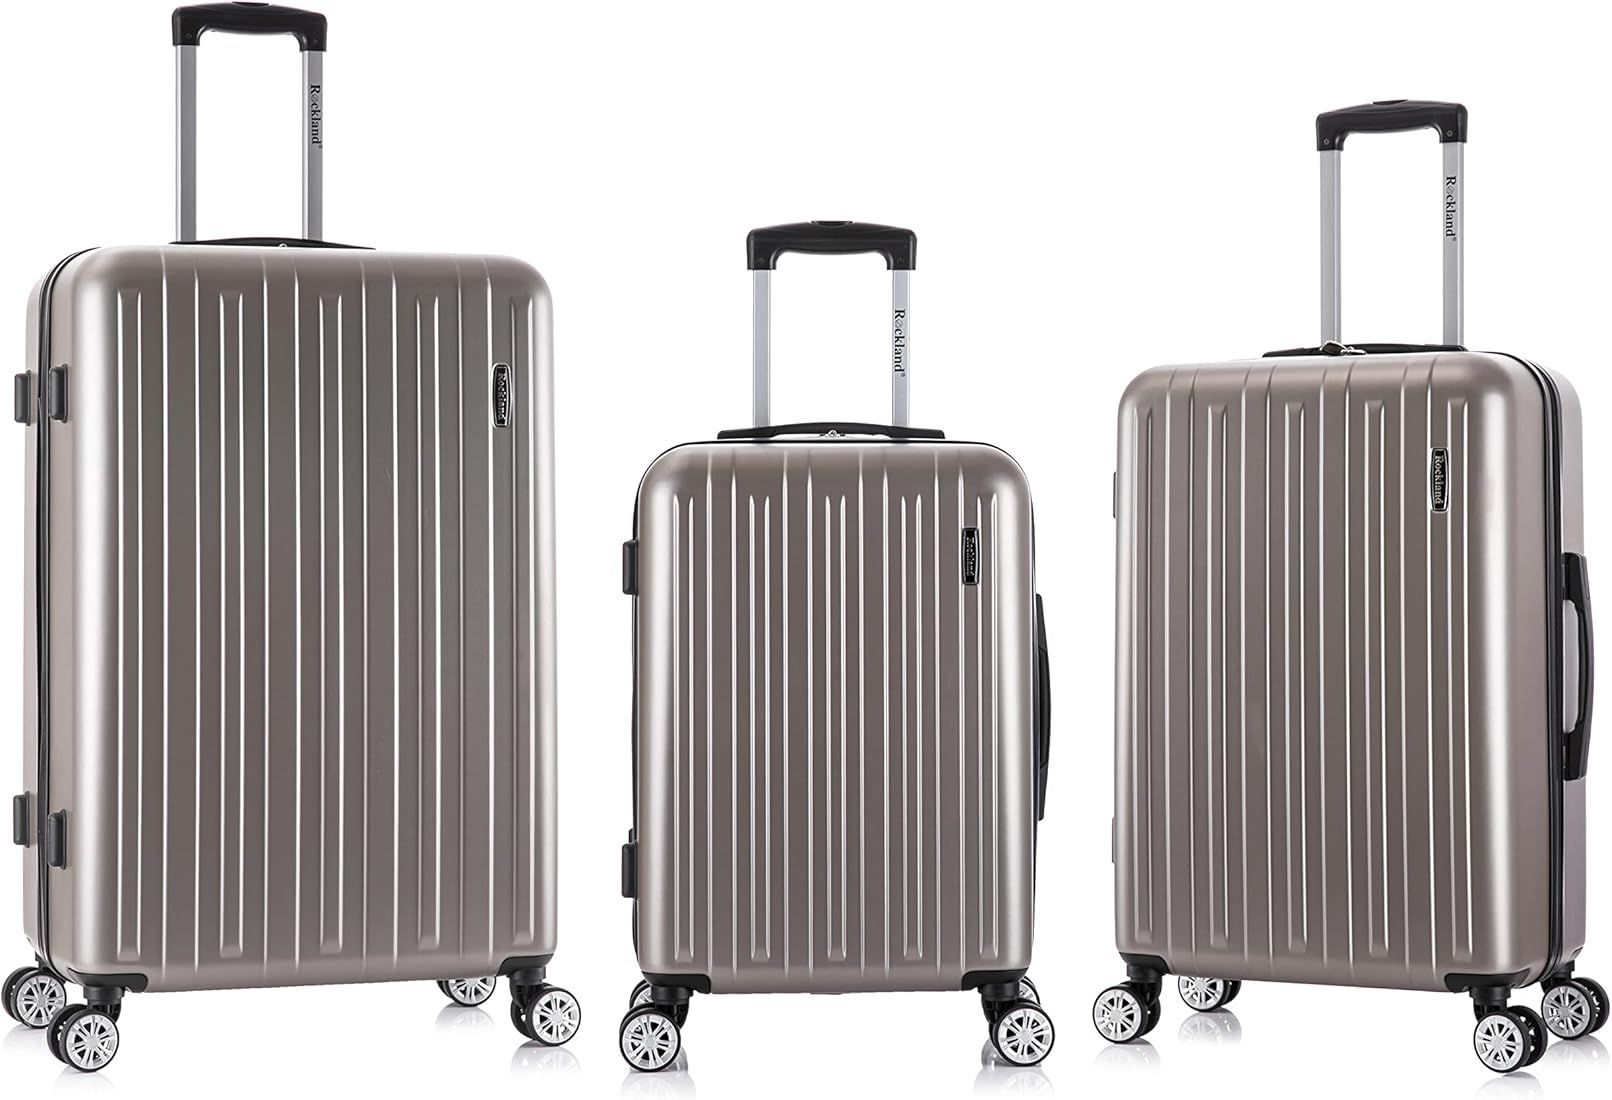 Rockland Paris Hardside Luggage with Spinner Wheels, Silver, 3-Piece Set (20/24/28) | Amazon (US)